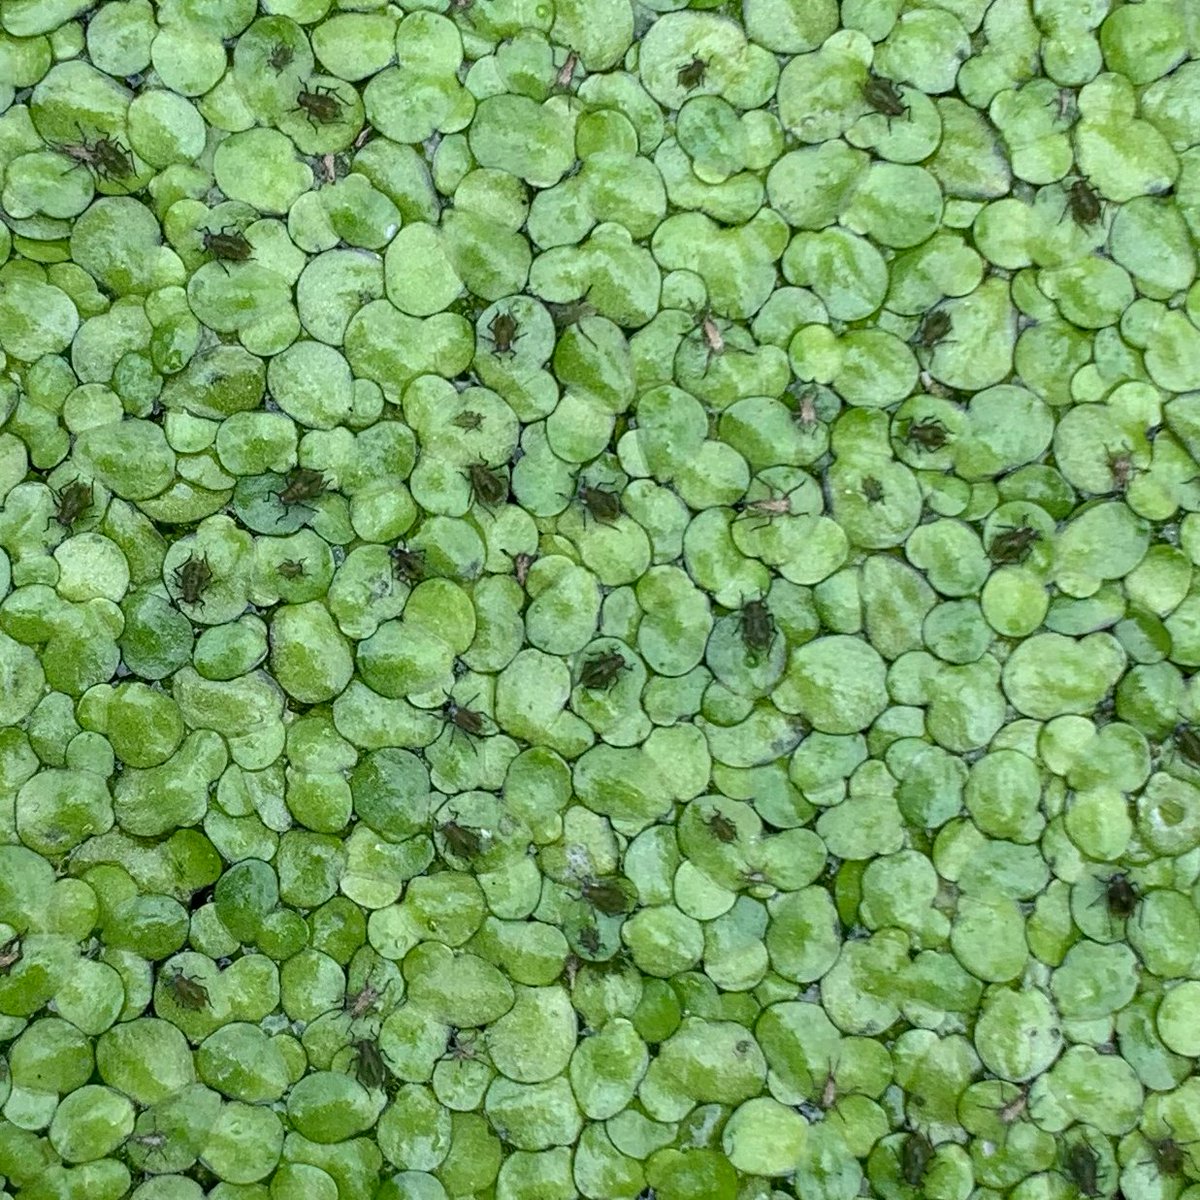 Water lily aphids are a pest to #duckweed. They have been shown to reduce duckweed growth rates under certain conditions. resjournals.onlinelibrary.wiley.com/doi/10.1111/ee… Photo credits: @CianRedmond4